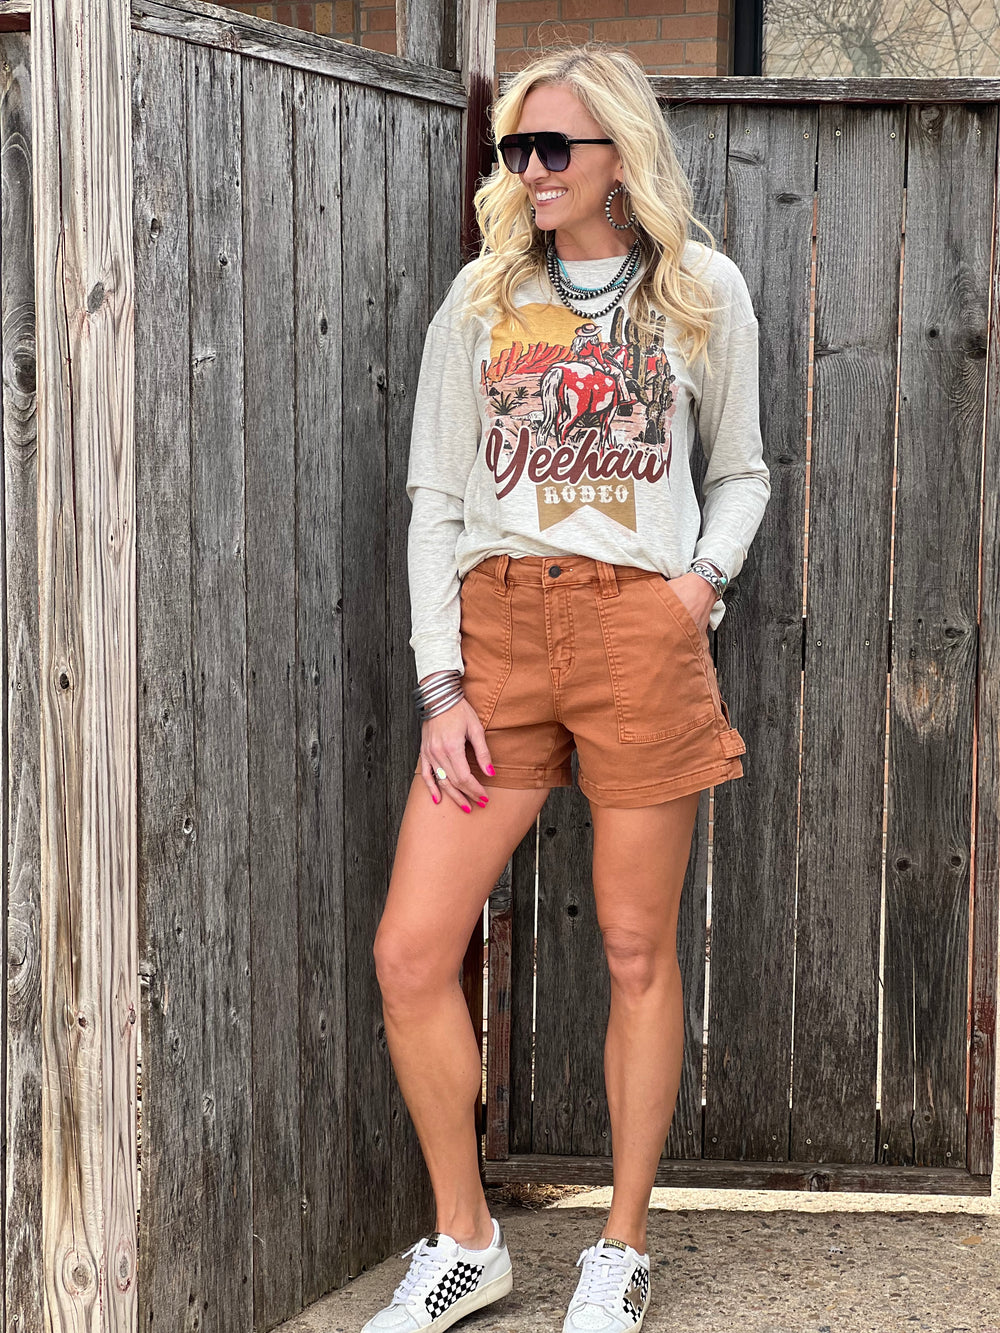 All Clothing – Horse Creek Boutique